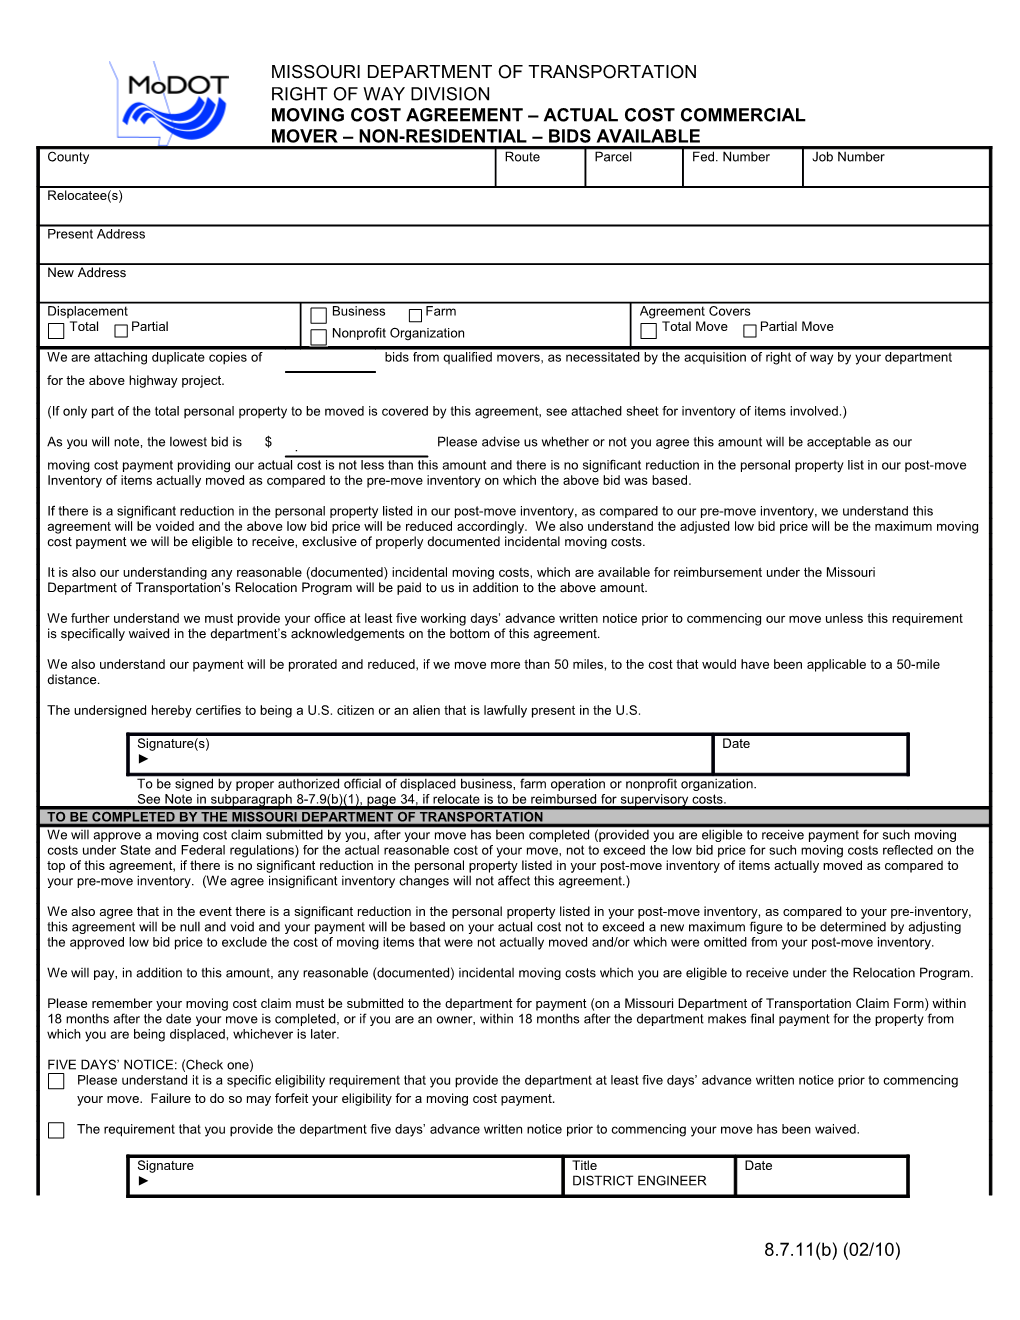 Moving Cost Agreement Actual Cost Commercial Mover Bids Form 236.8.7.11.B